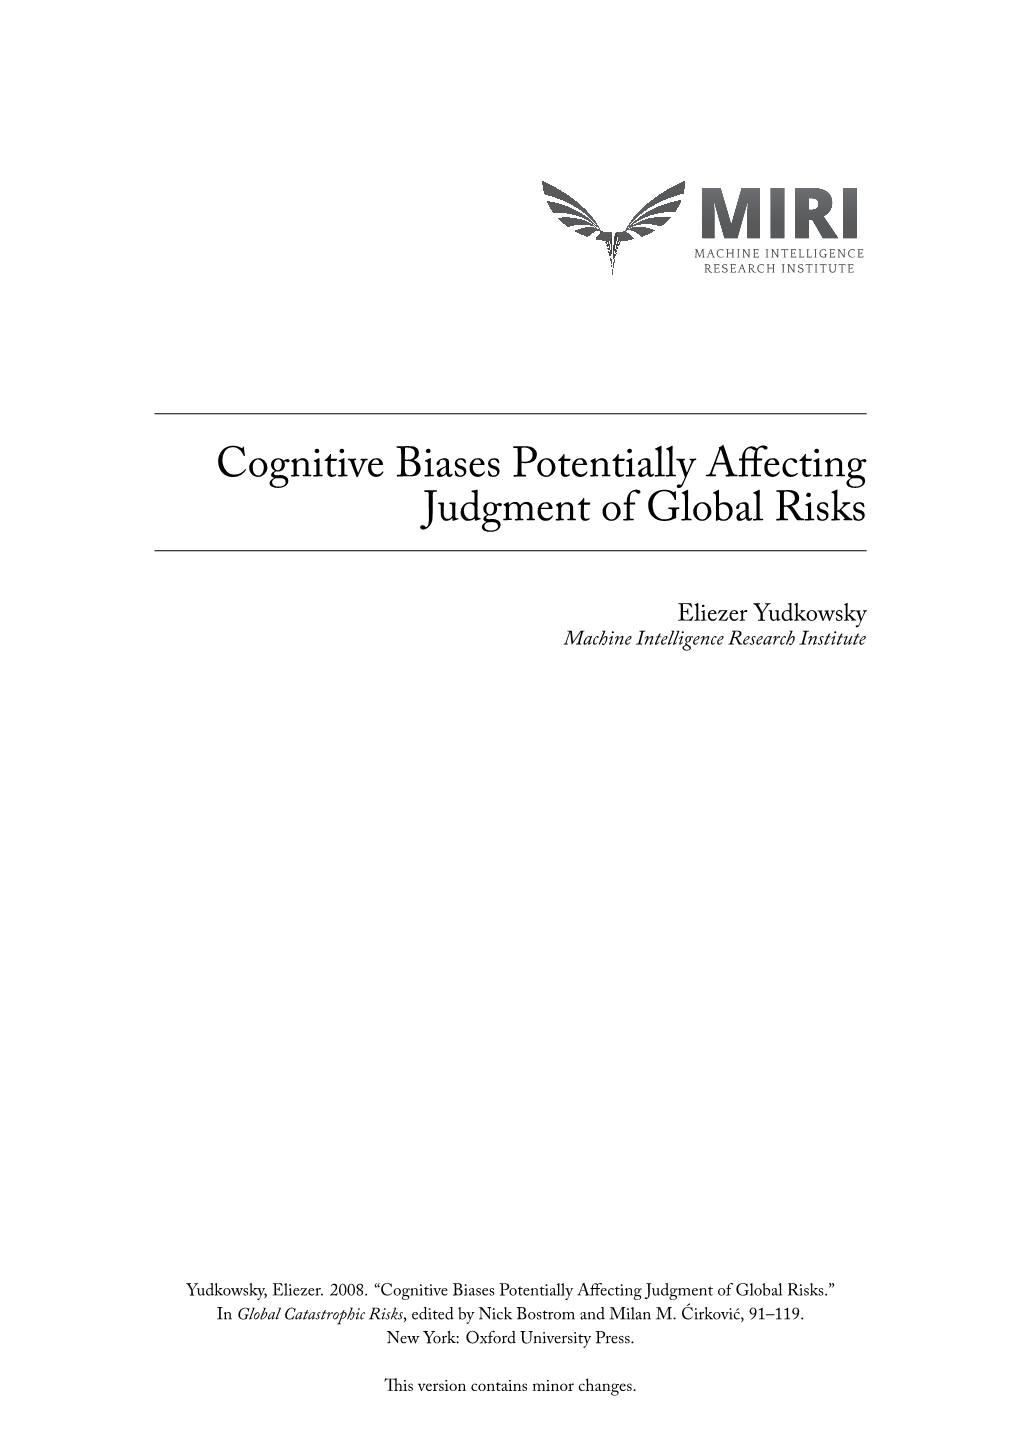 Cognitive Biases Potentially Affecting Judgment of Global Risks